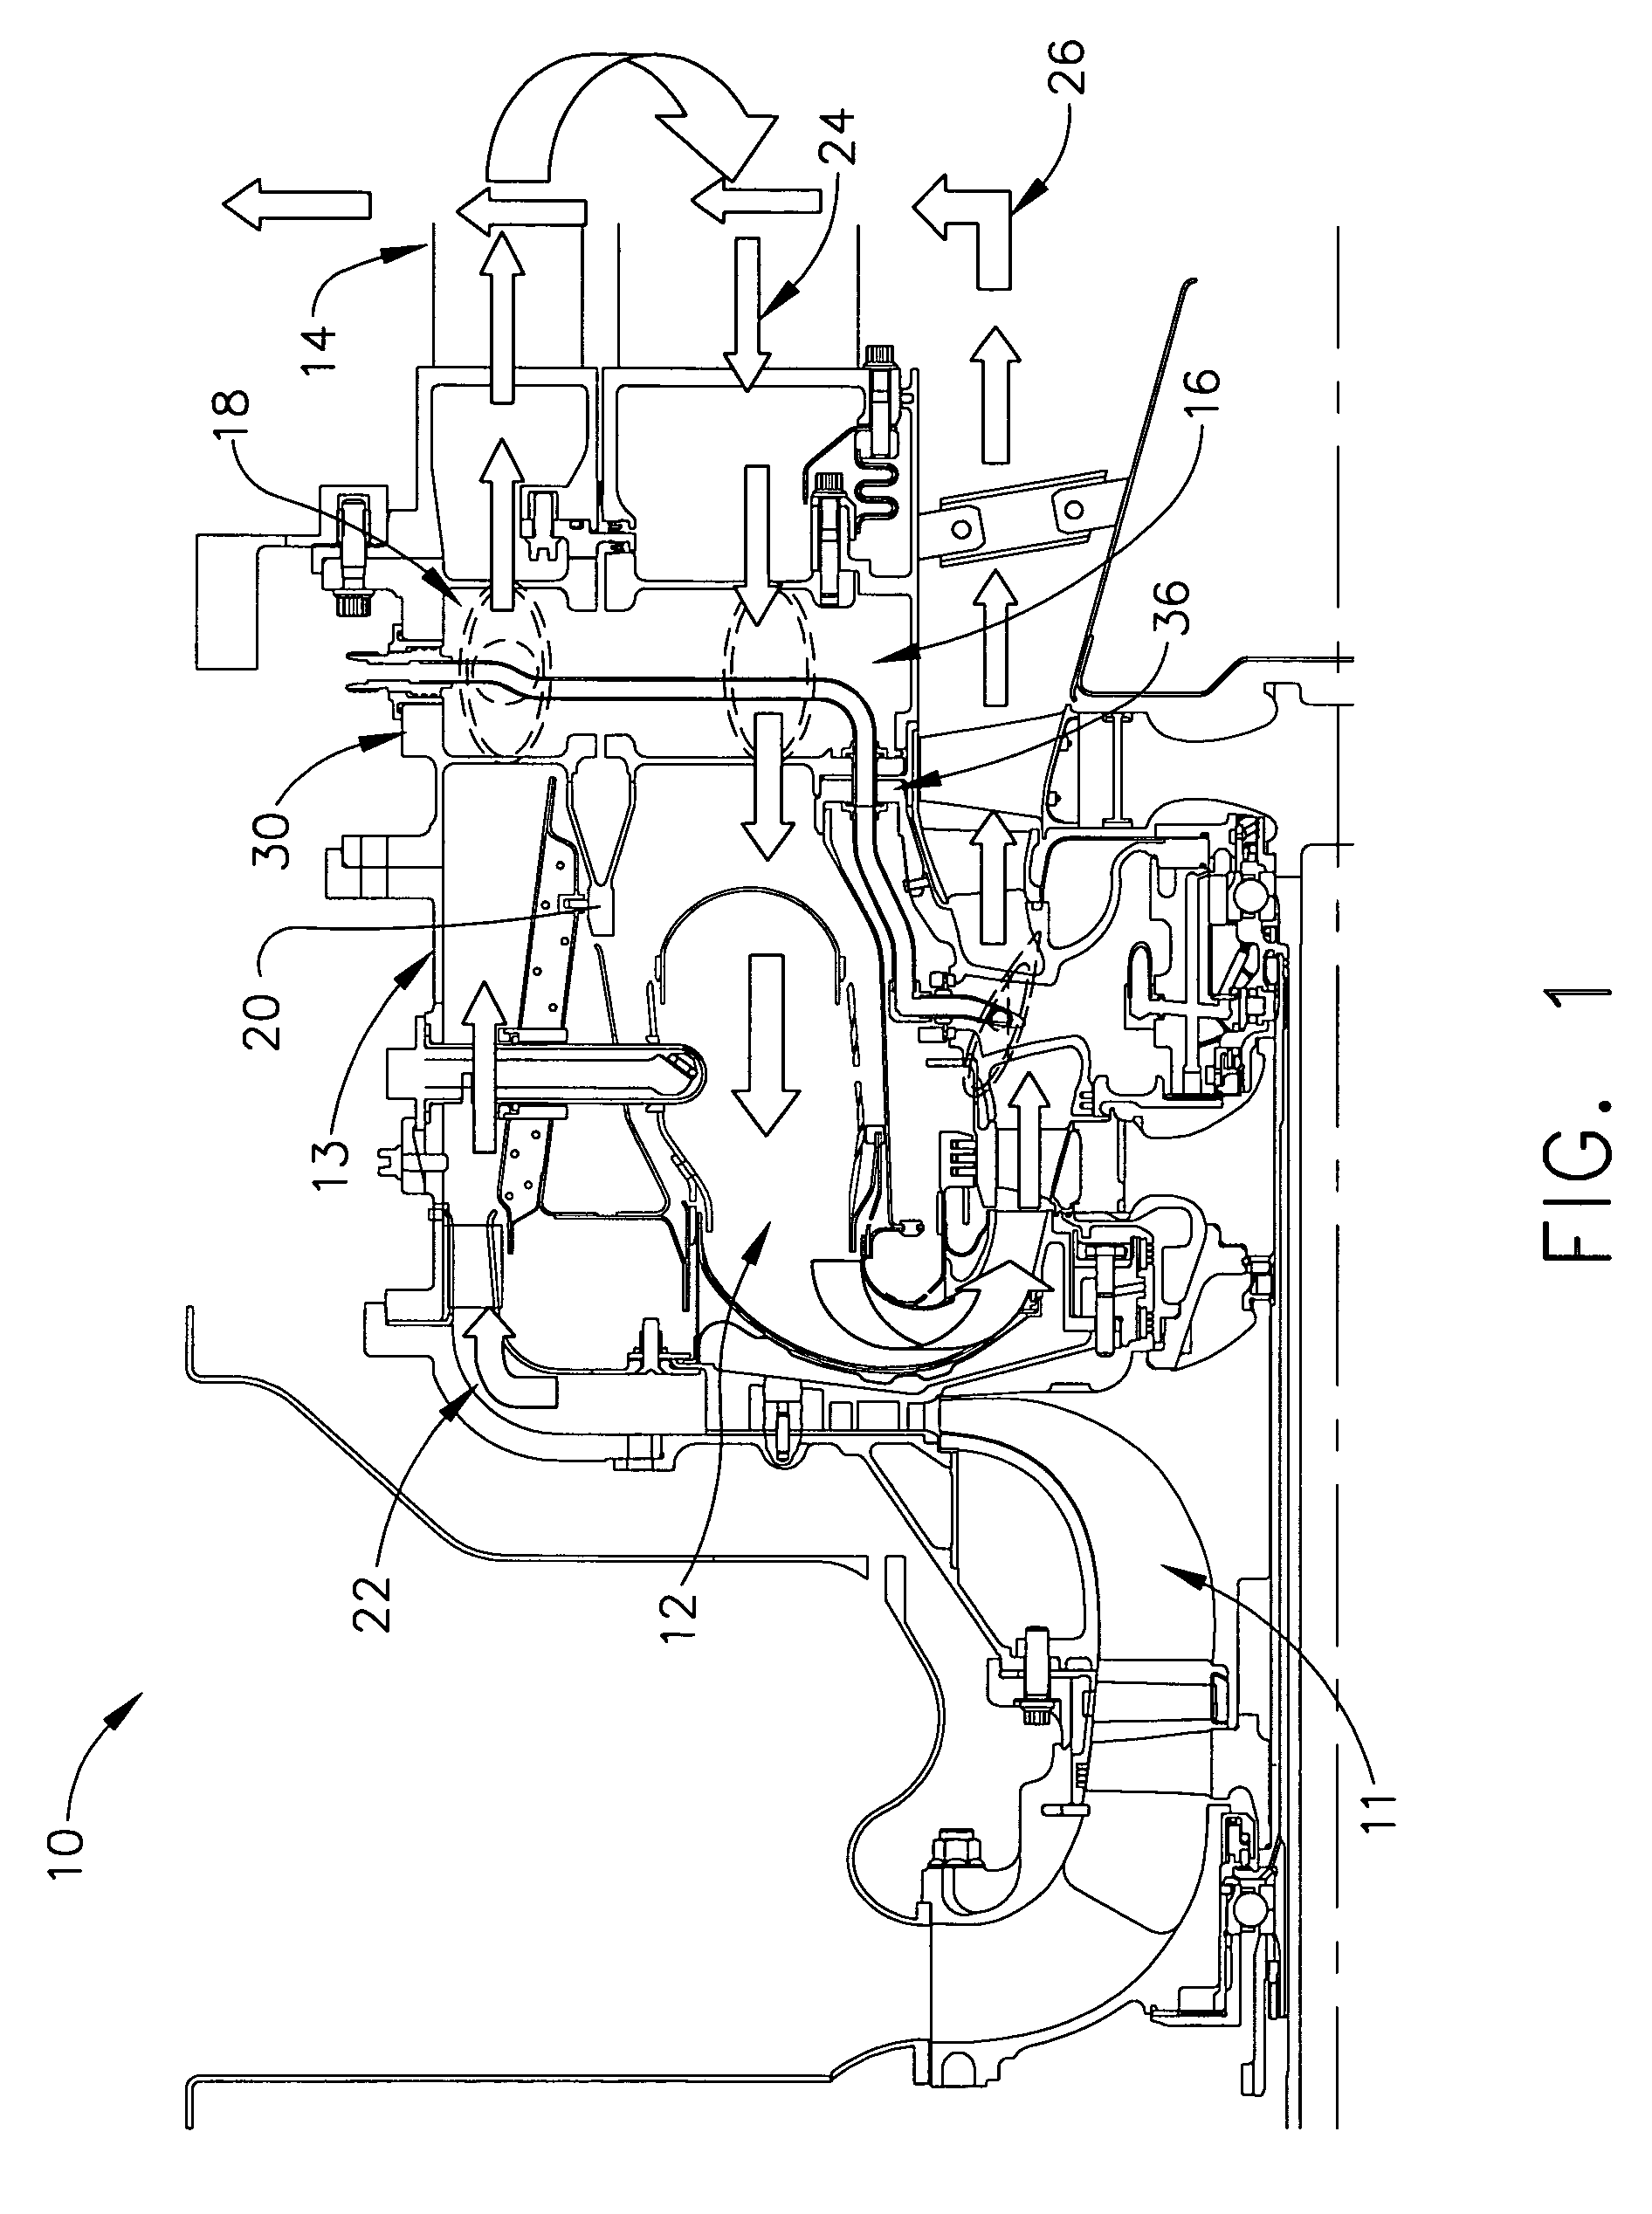 Recuperator and turbine support adapter for recuperated gas turbine engines